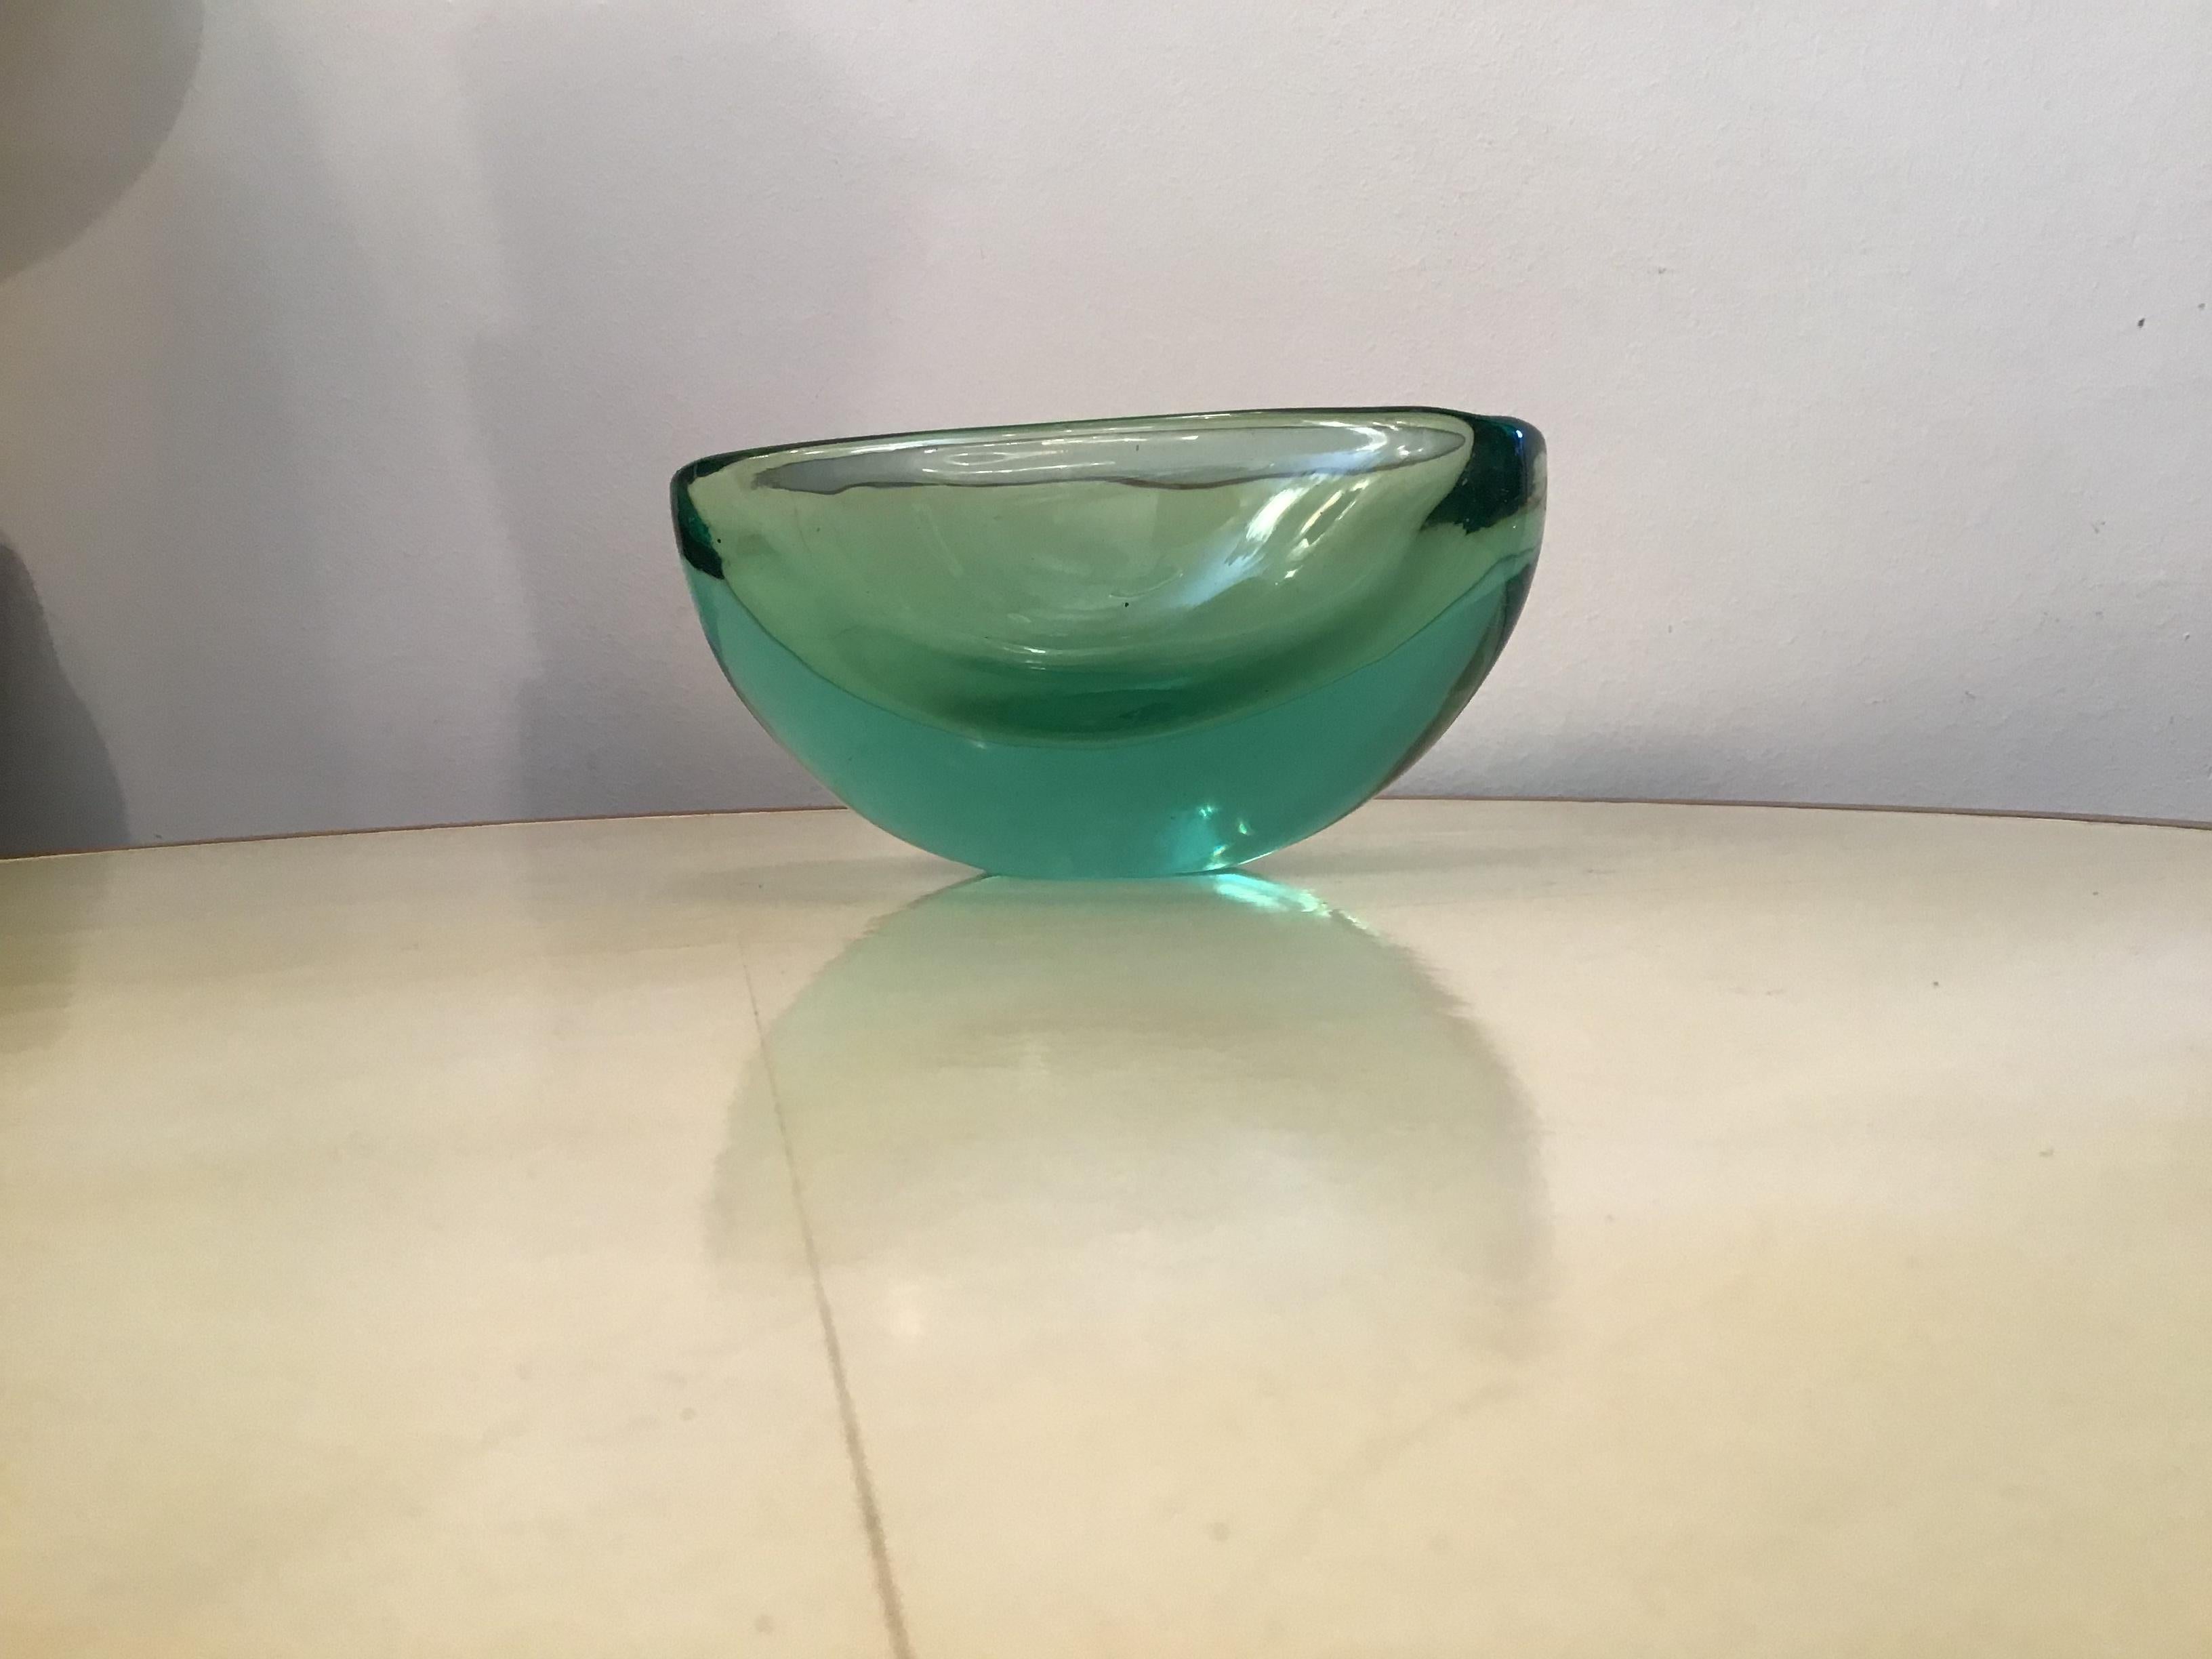 Italian Archimede Seguso Oval Bowl, Green Submerged Glass Centrepiece, 1950 For Sale